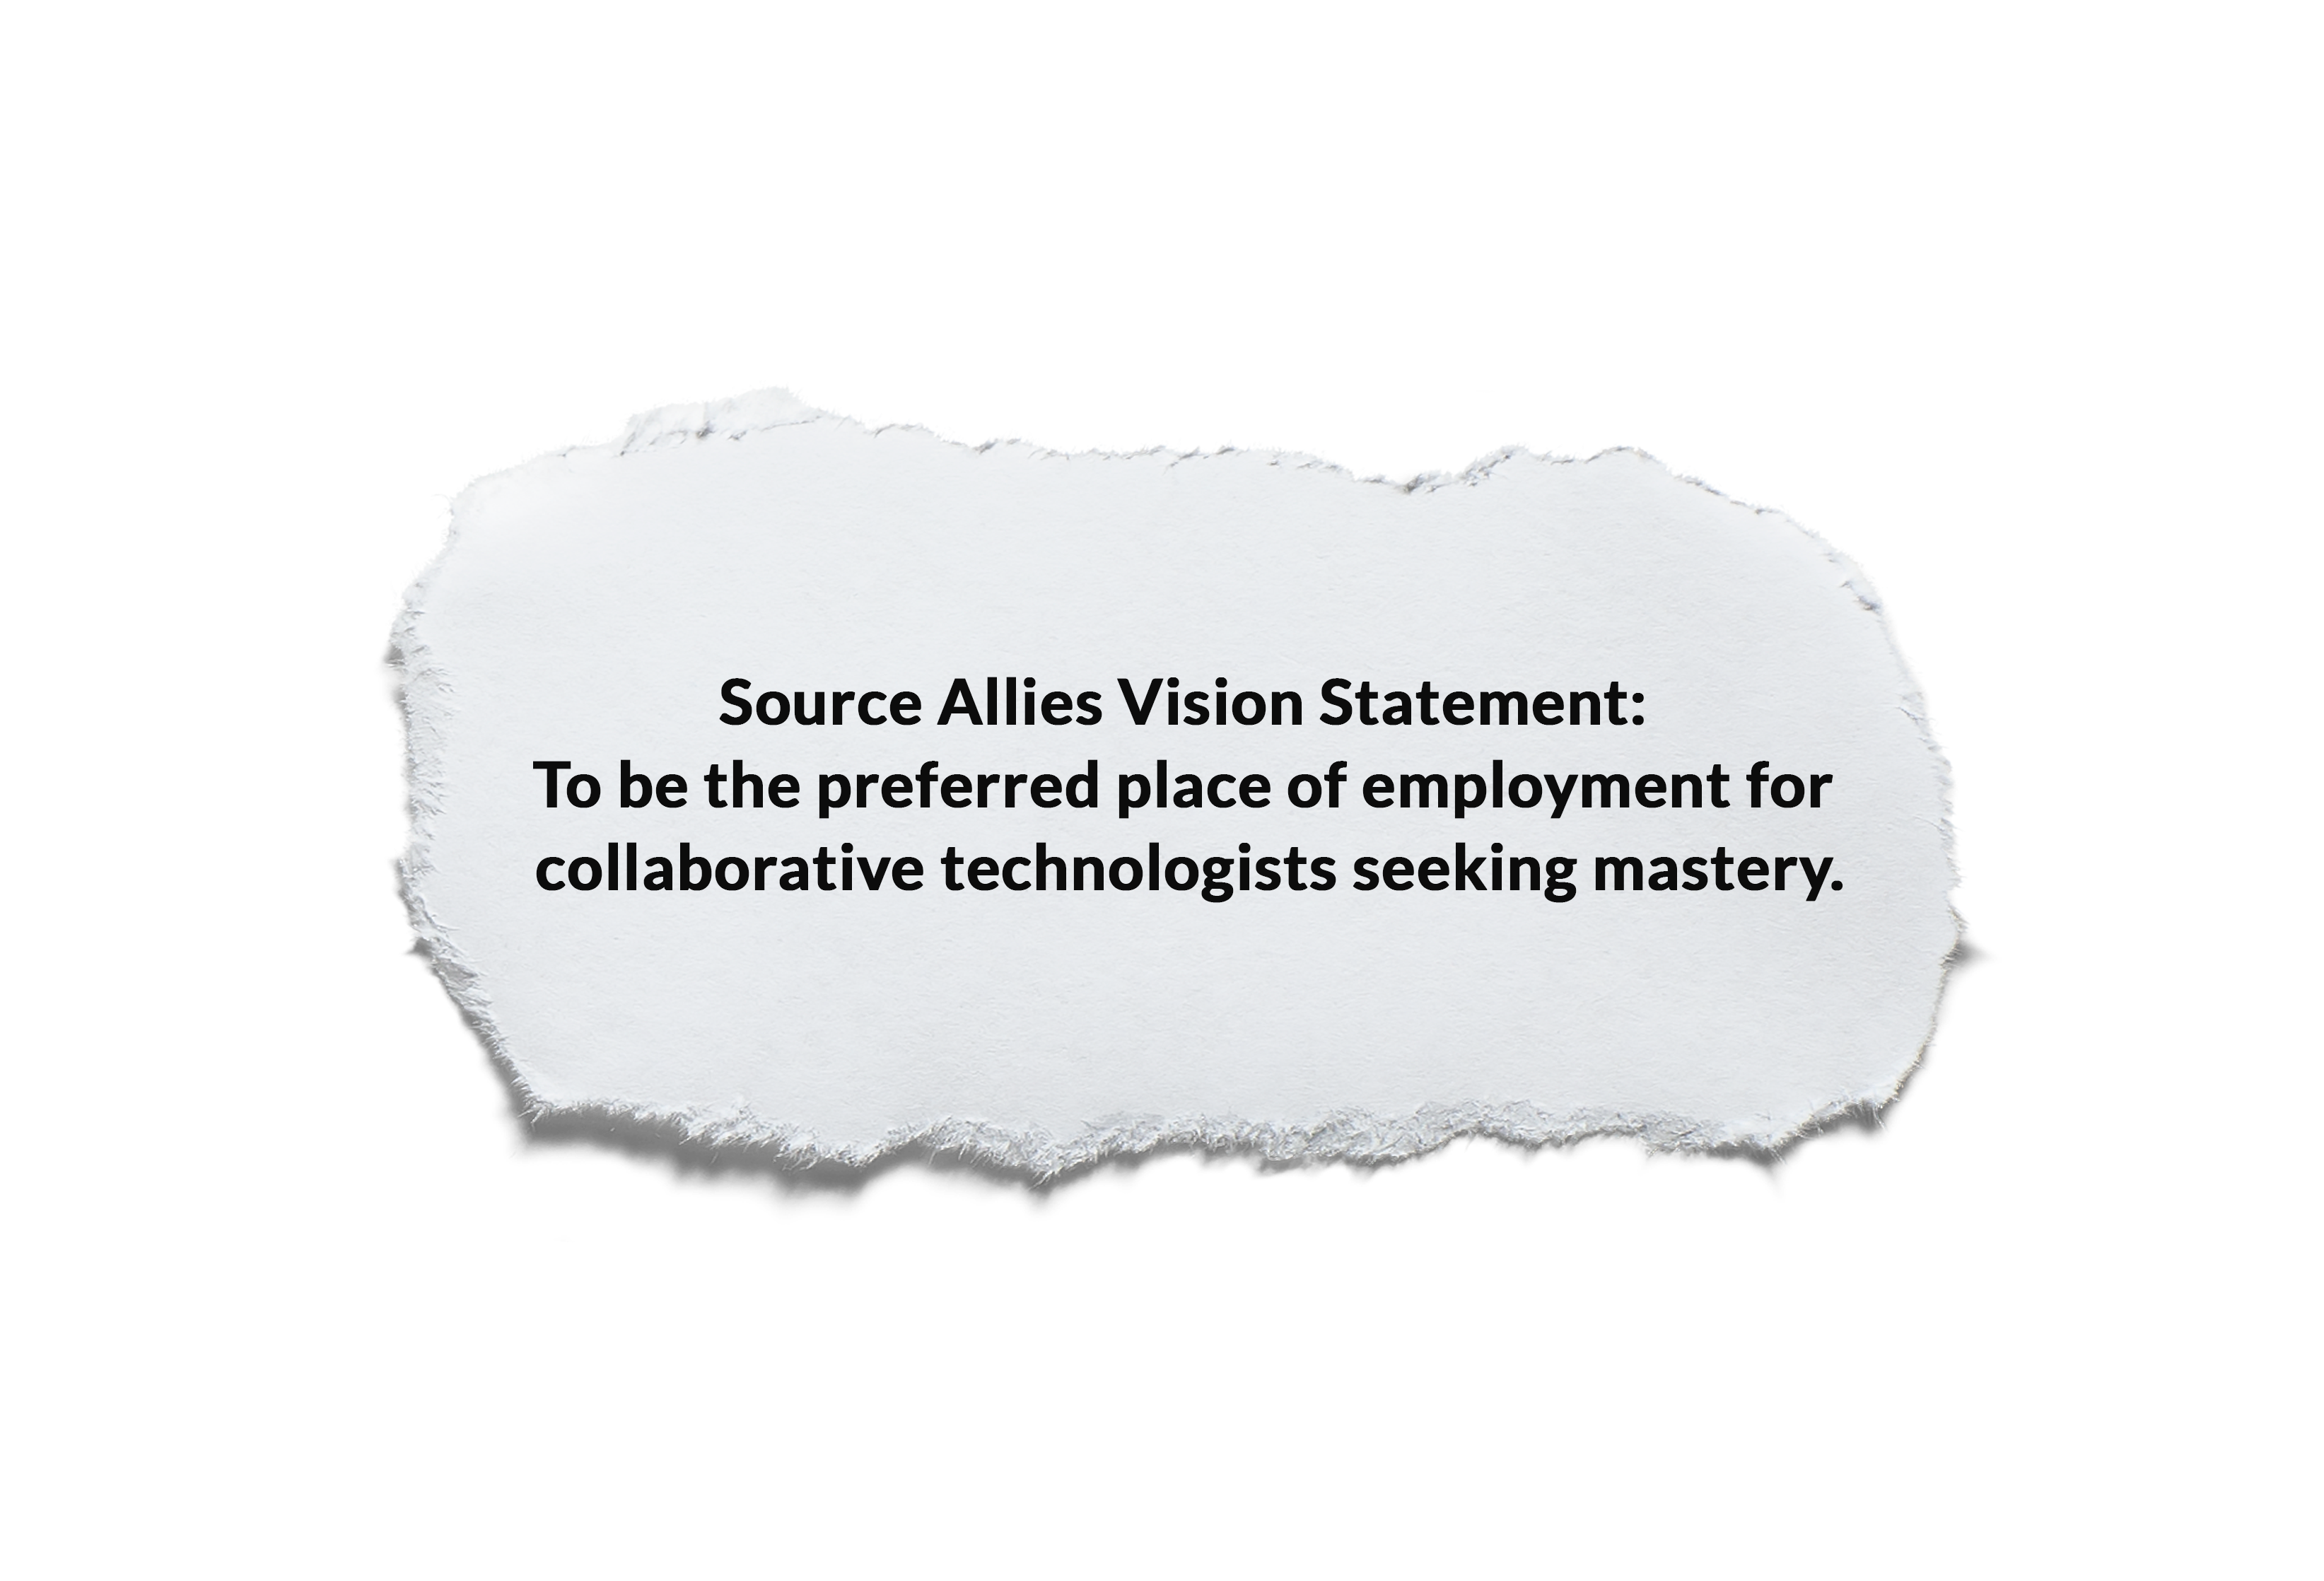 Source Allies Vision Statement: To be the preferred place of employment for collaborative technologists seeking mastery.